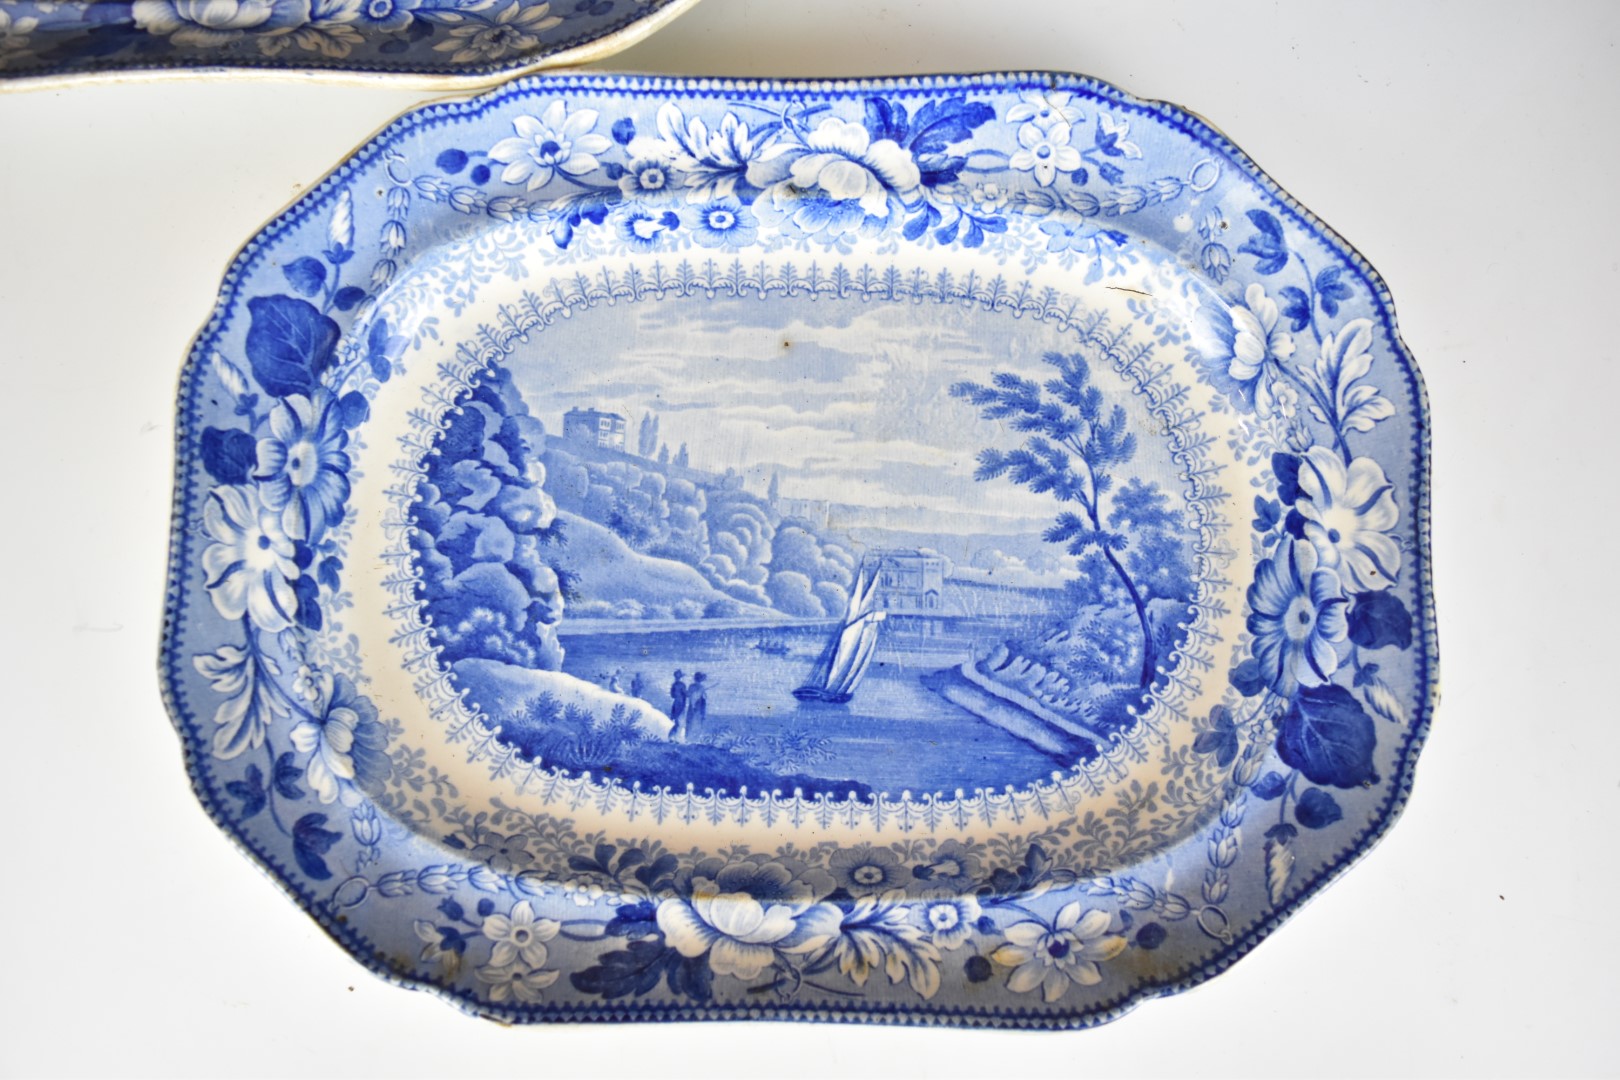 19thC blue and white transfer printed ware with named scenes of Bristol, Clifton and River Avon, - Image 2 of 10